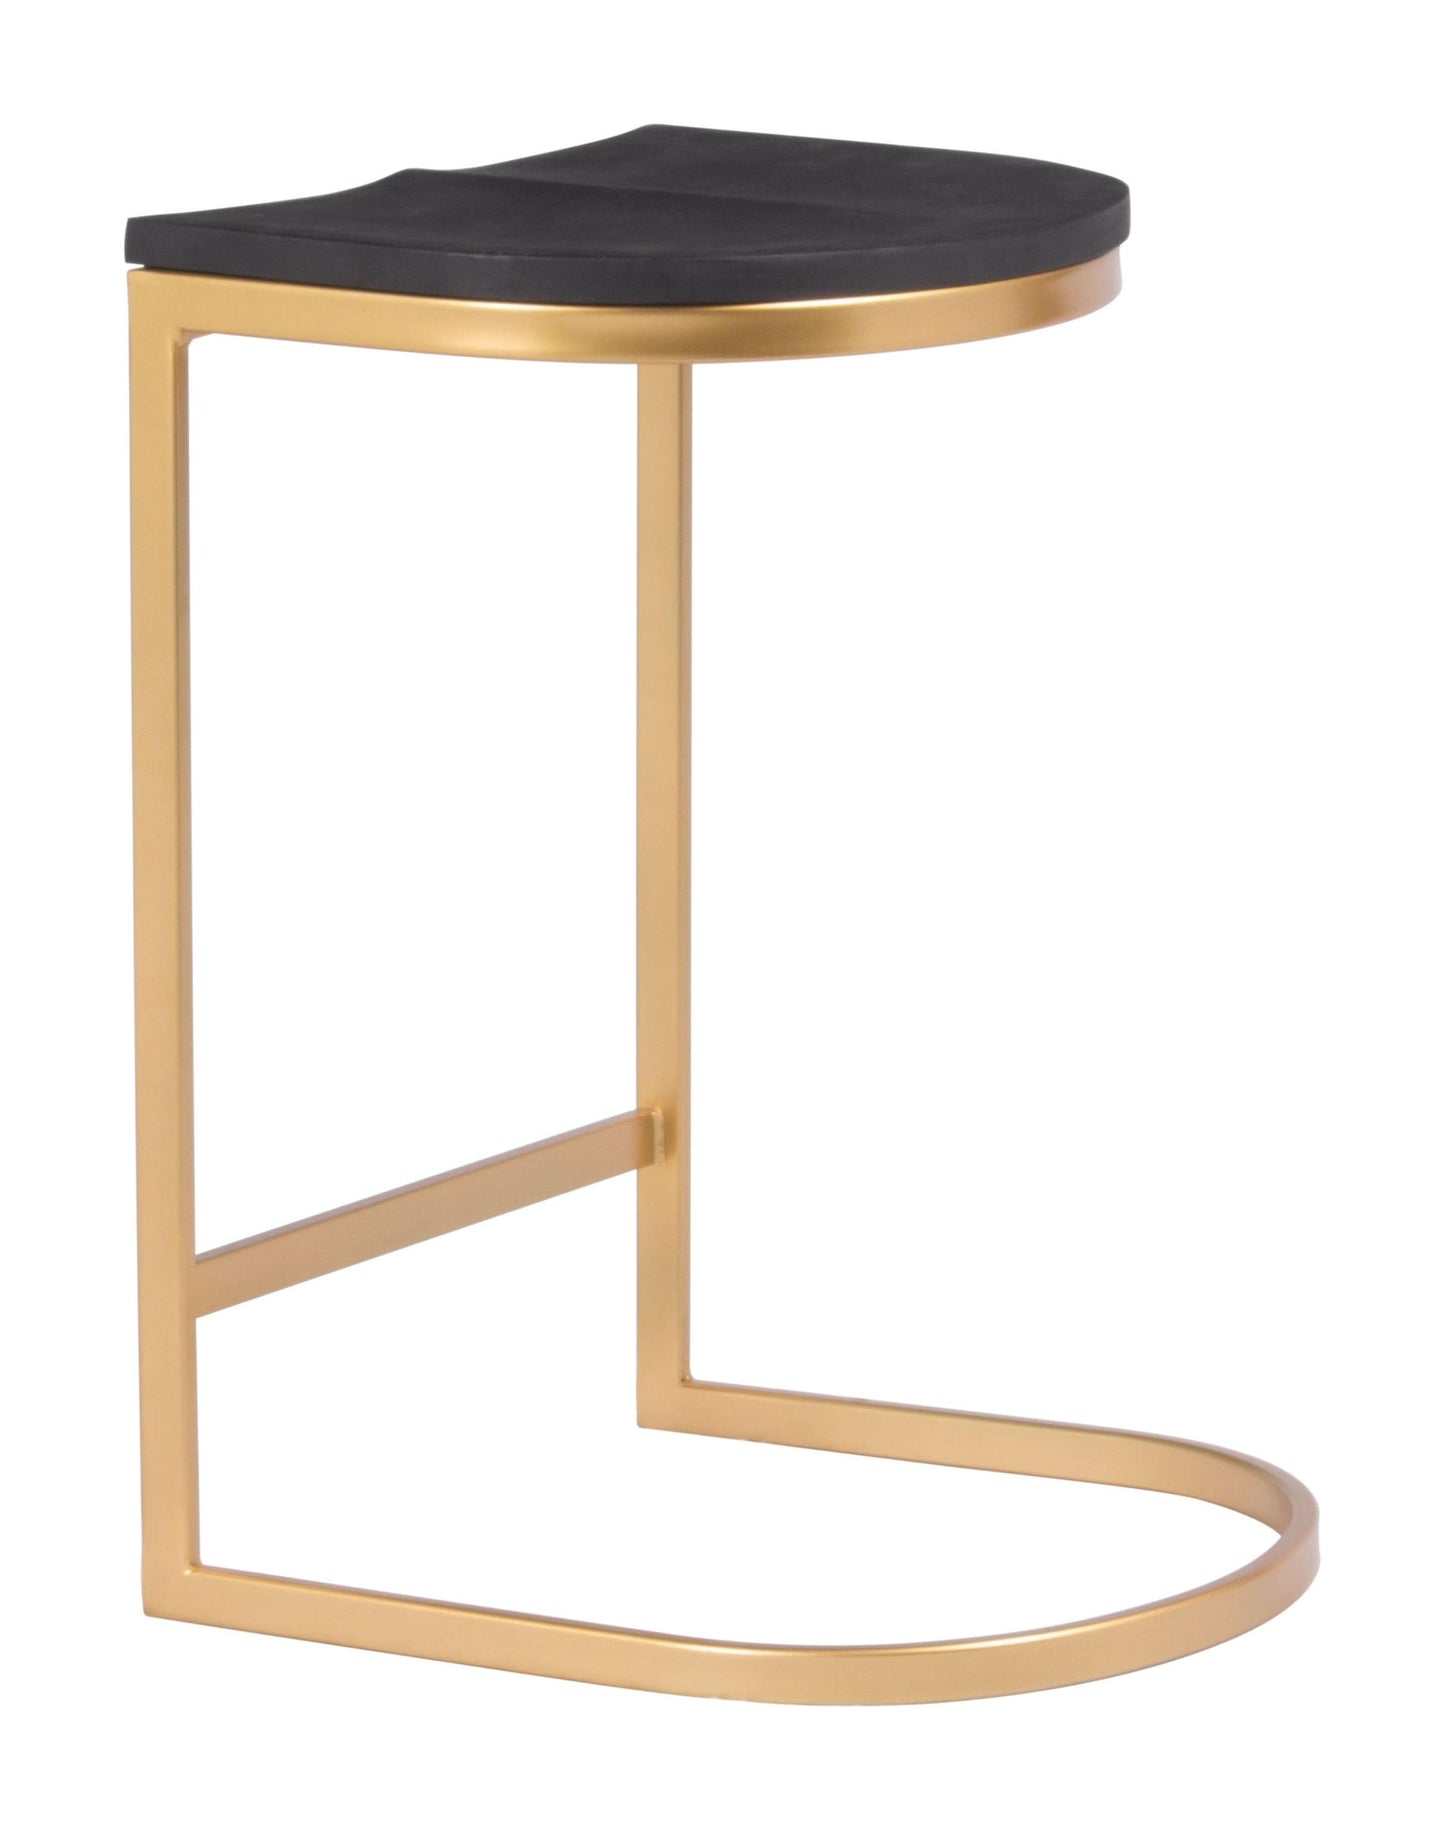 Angled view of no assembly stool